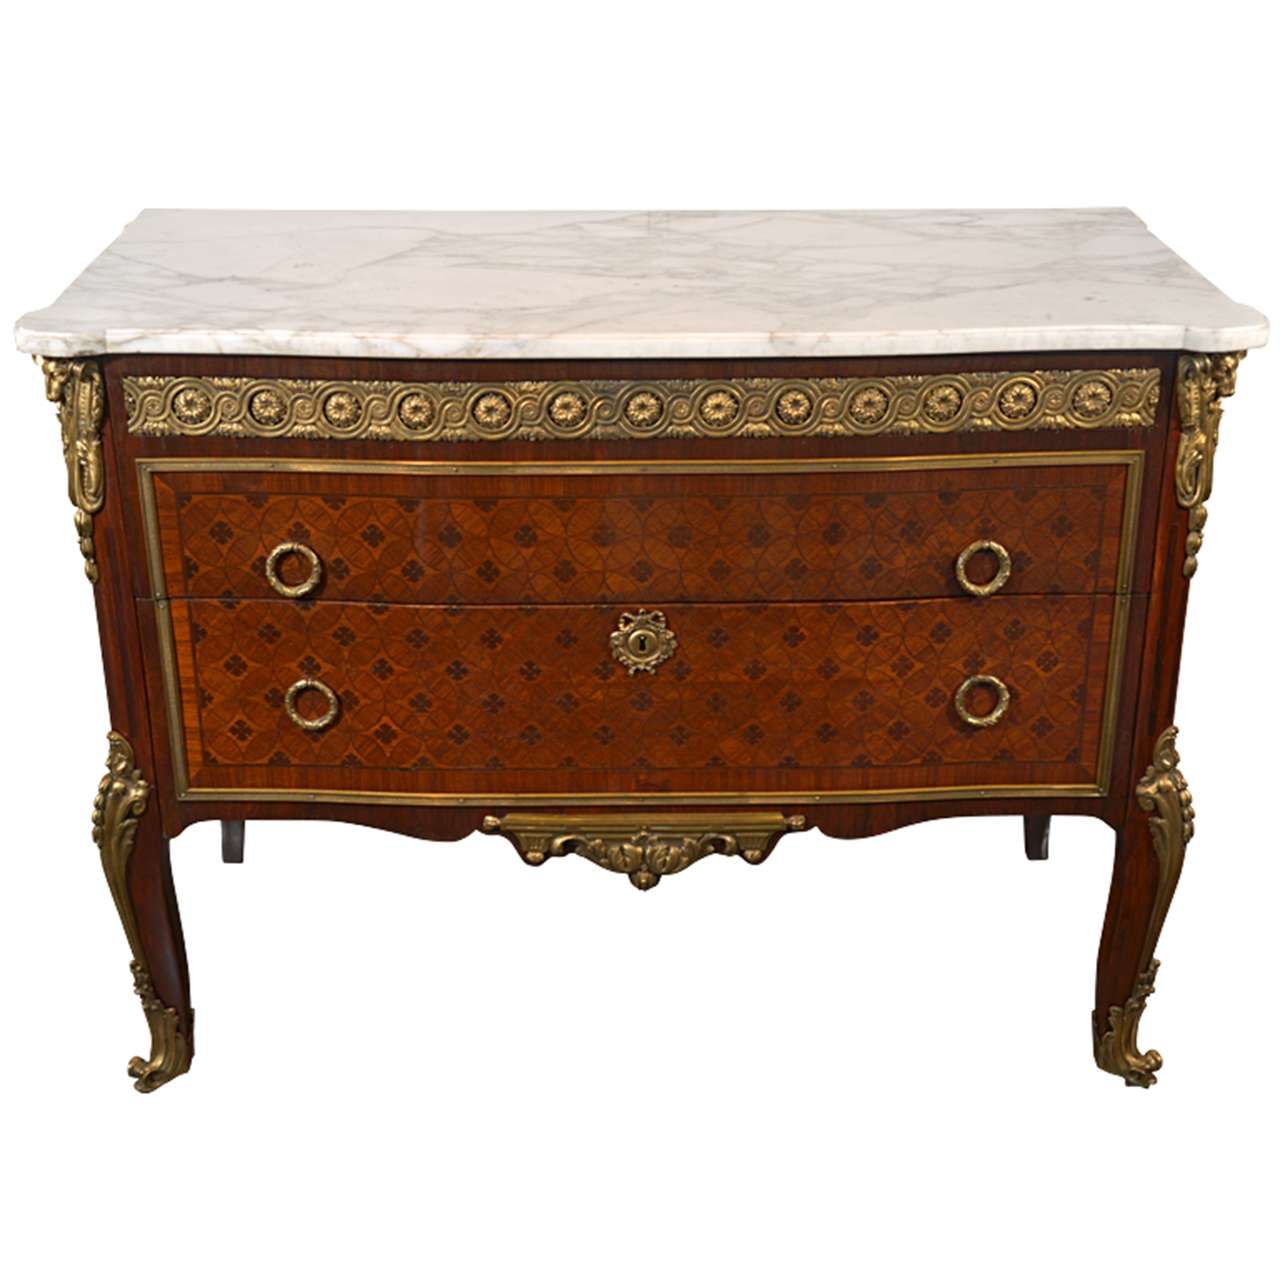 19th c. Louis XVI Mahogany and Parquetry Inlay For Sale